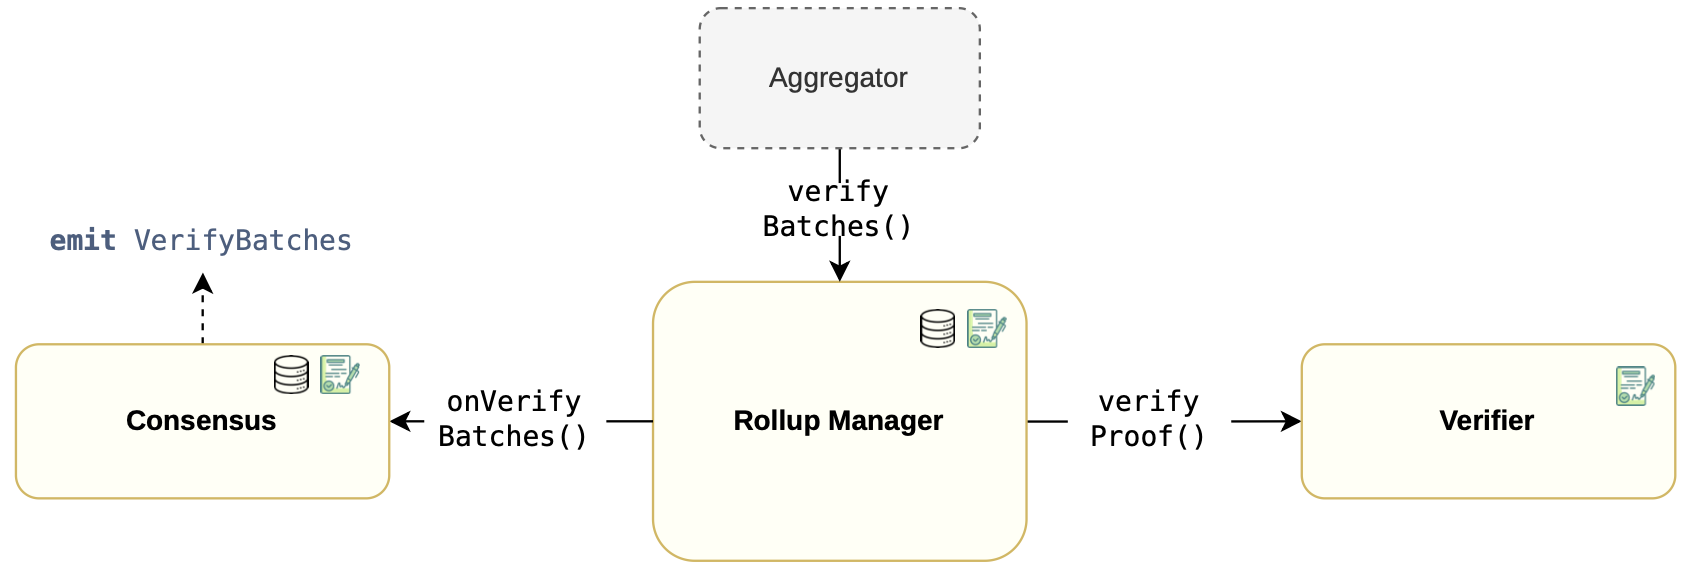 ulxly-consensus-rollupmanager-aggregator